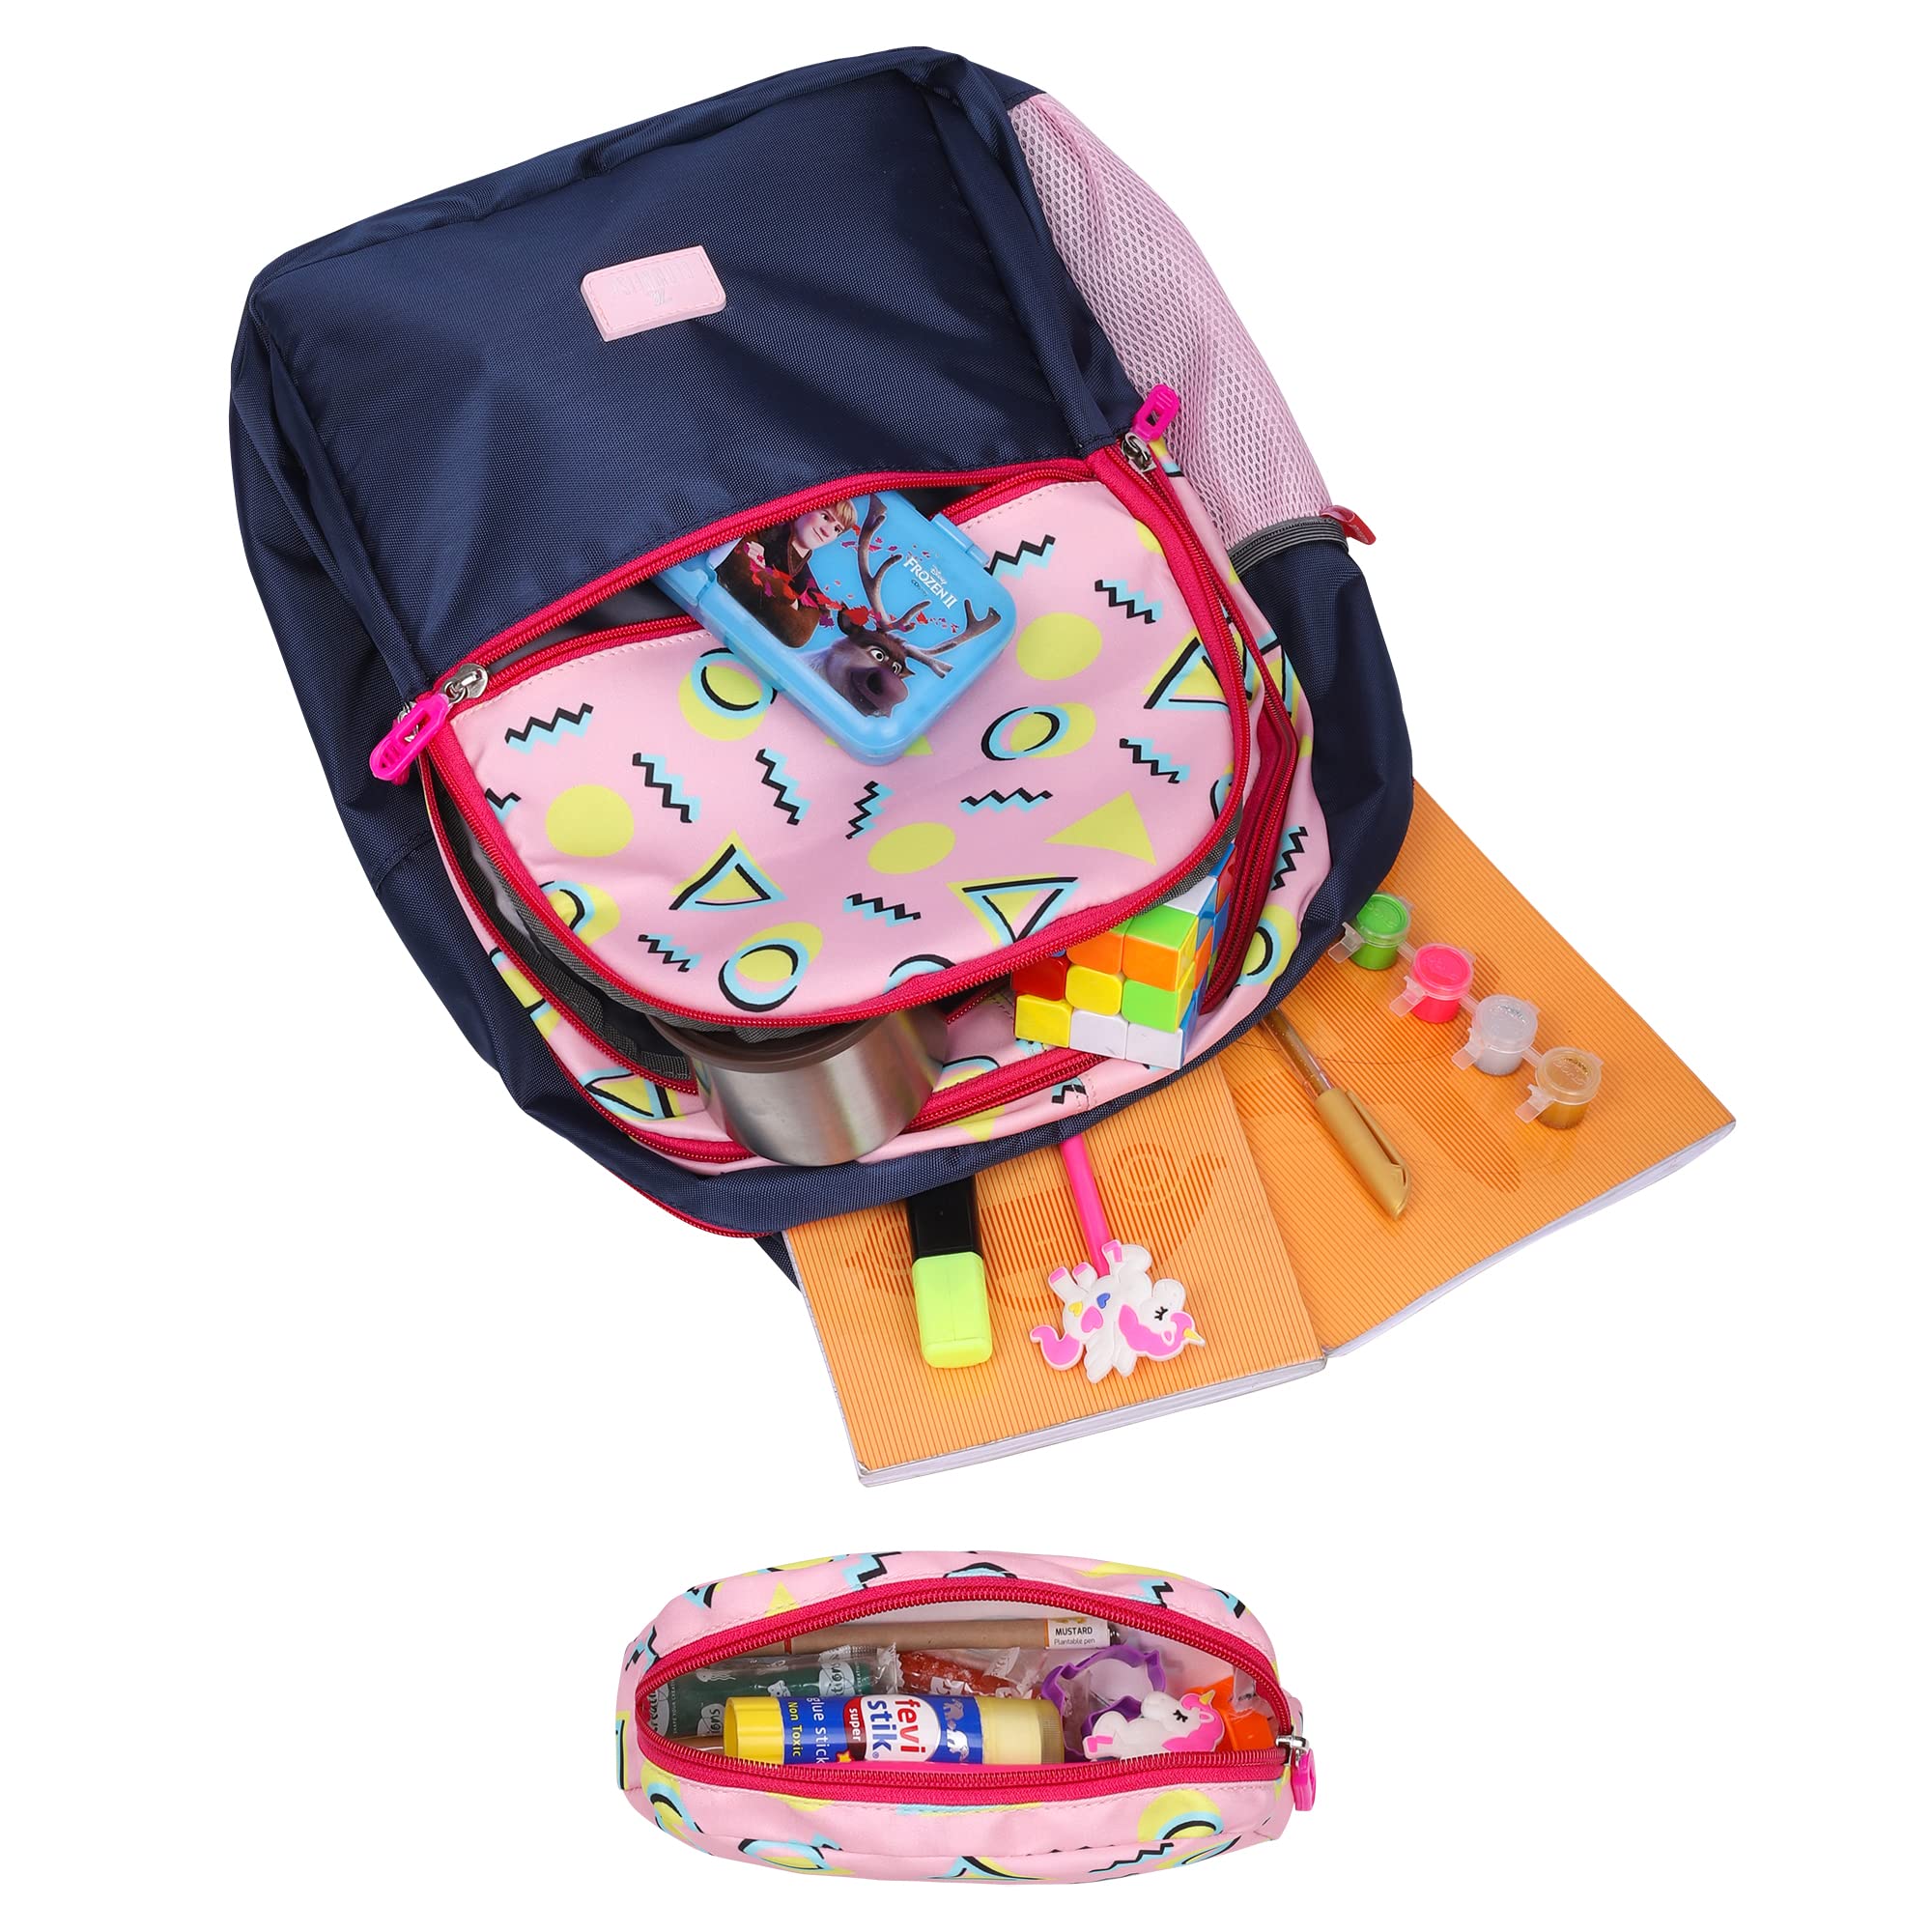 The Clownfish Edutrek Series Printed Polyester 33.5 L School Backpack with Pencil/Stationery Pouch School Bag Front Zip Pocket Daypack Picnic Bag For School Going Boys & Girls Age-10+ years (Rose Pink)